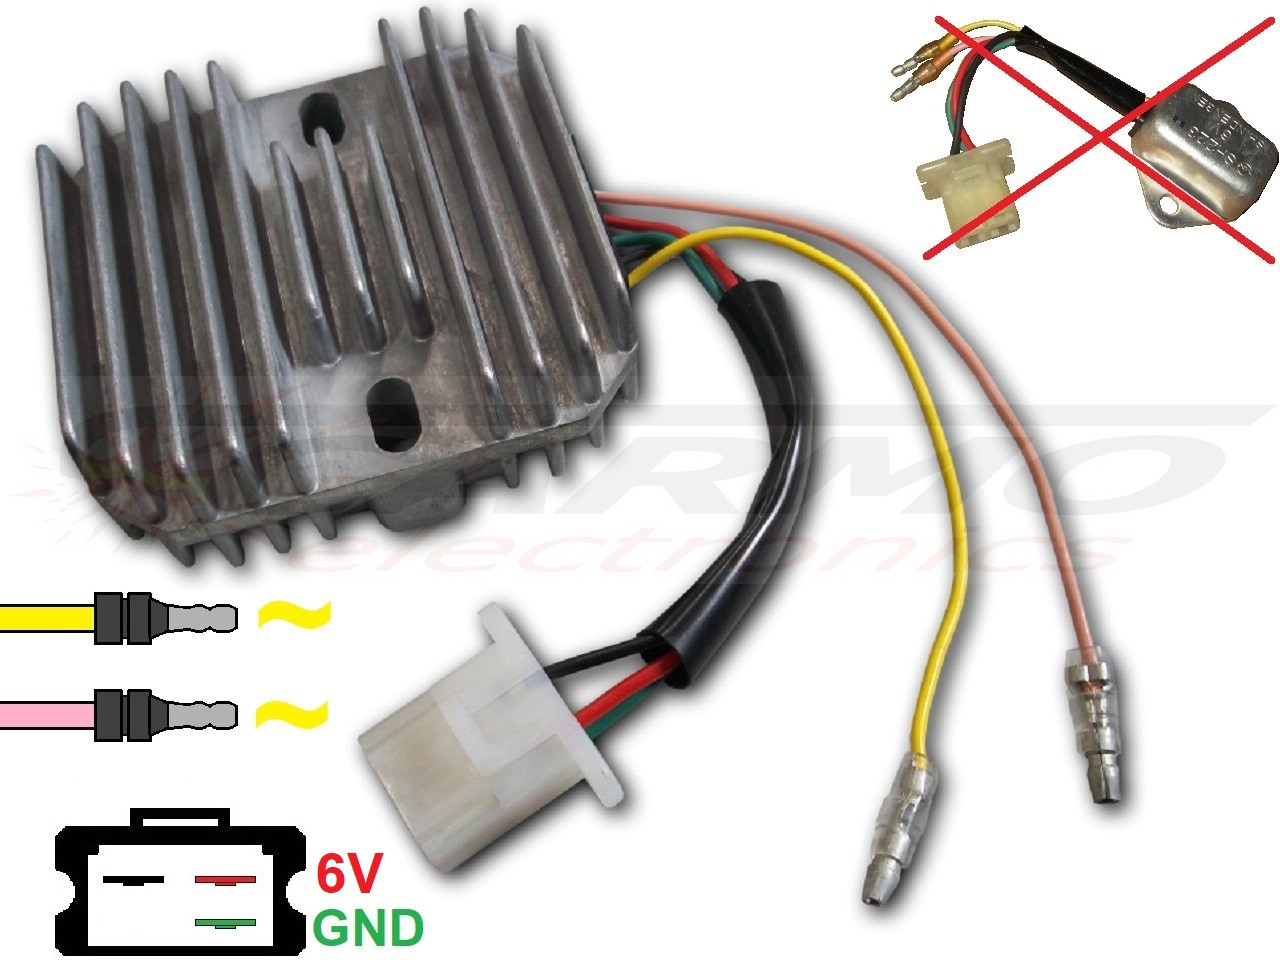 CARR681 SH223 Honda XL250S GN400 CB125s XL125s XL185s 6V Voltage regulator rectifier - Click Image to Close